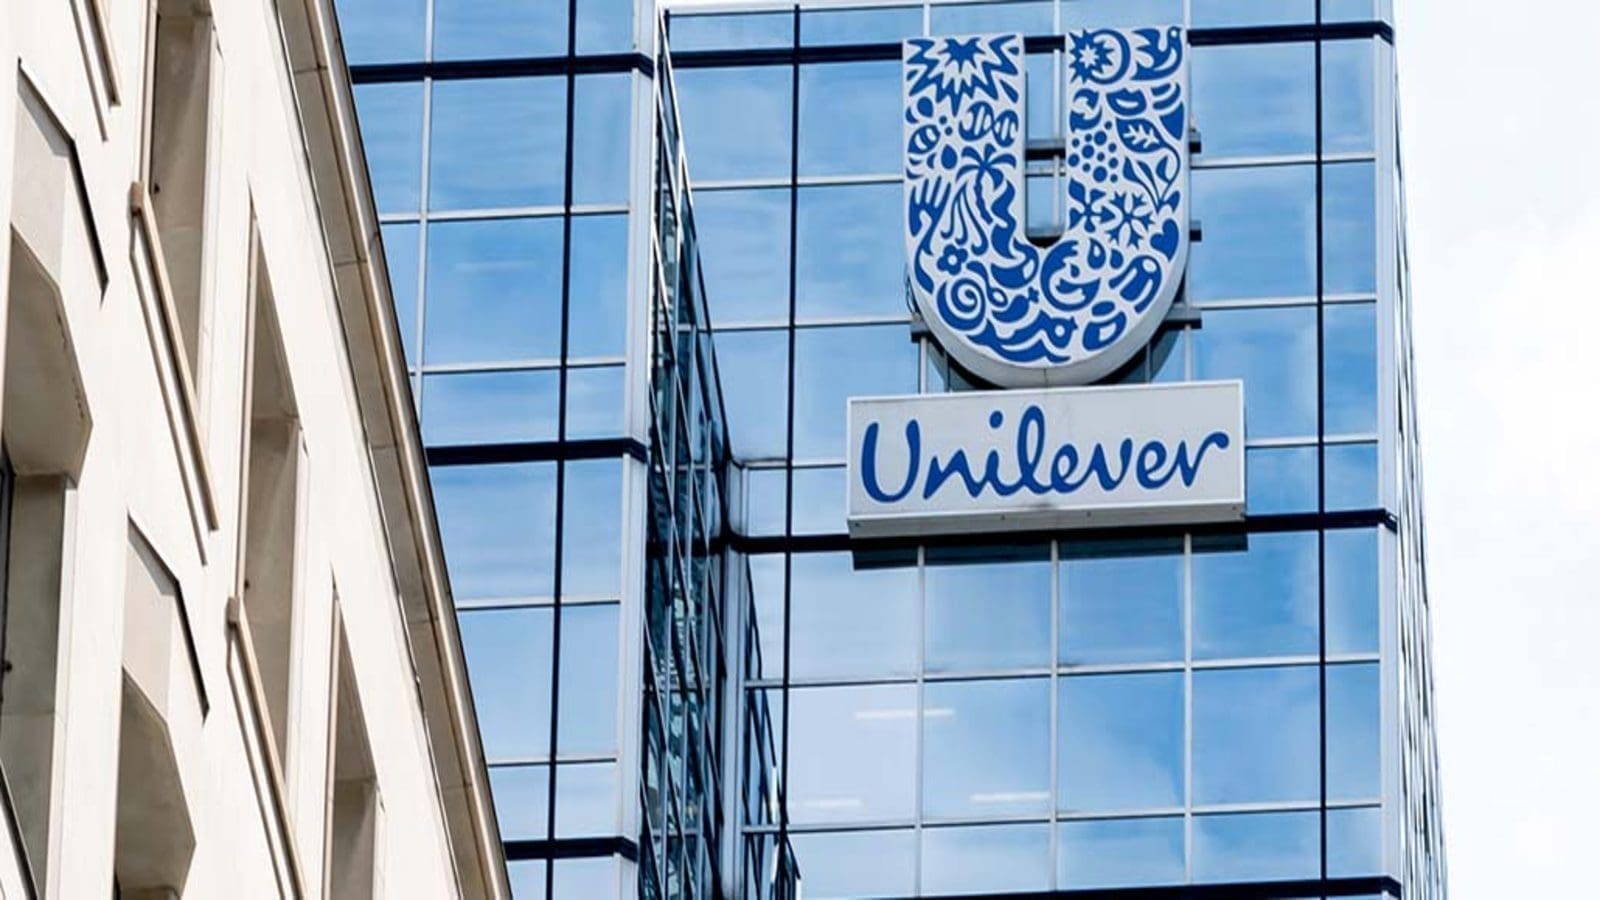 Unilever’s TaiCang facility named world’s most advanced ice cream factory